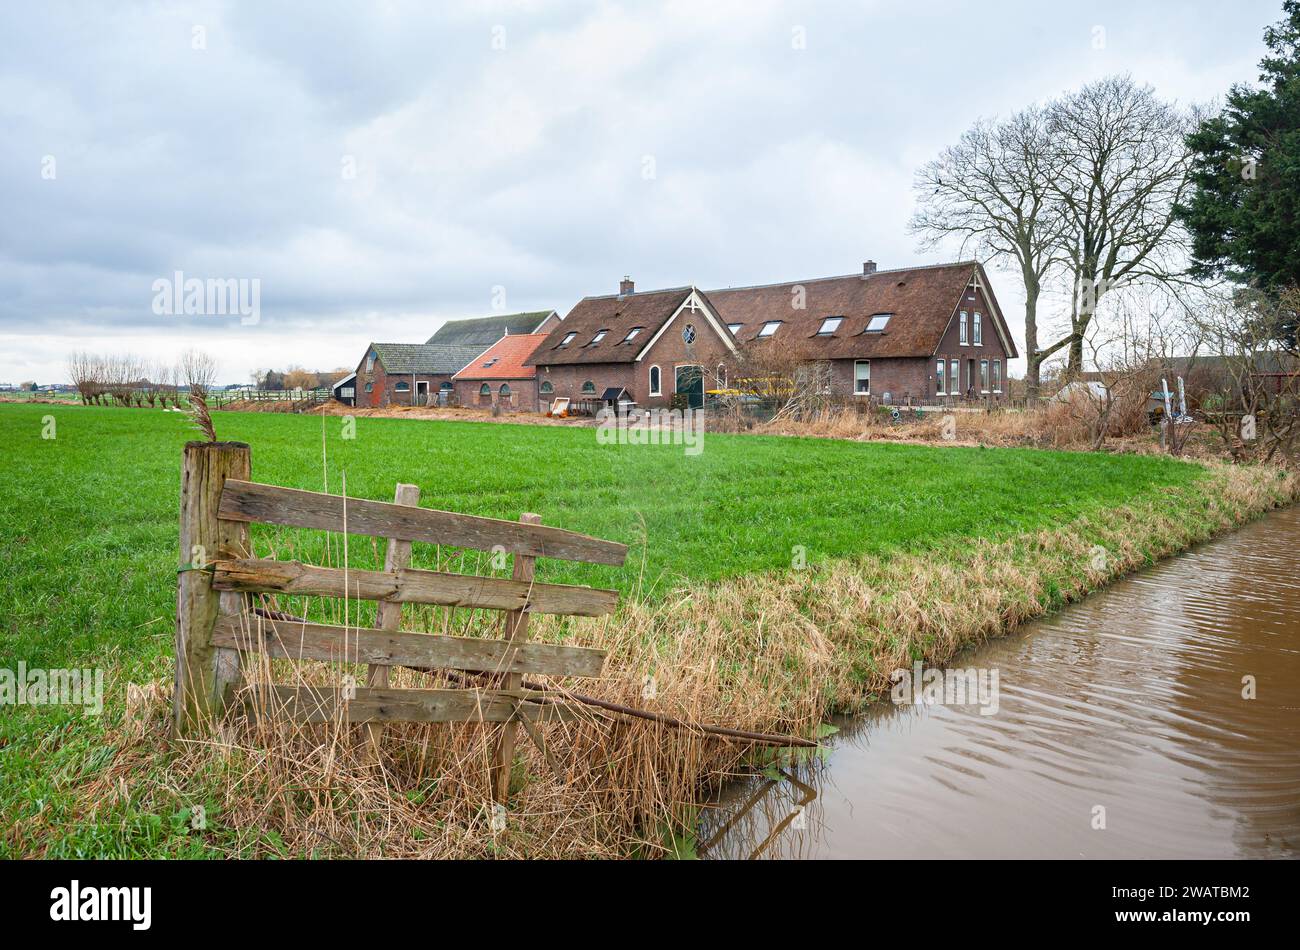 Idyllic image of a wooden fence near a ditch and old farmhouse in the Dutch landscape near Waddinxveen. Stock Photo